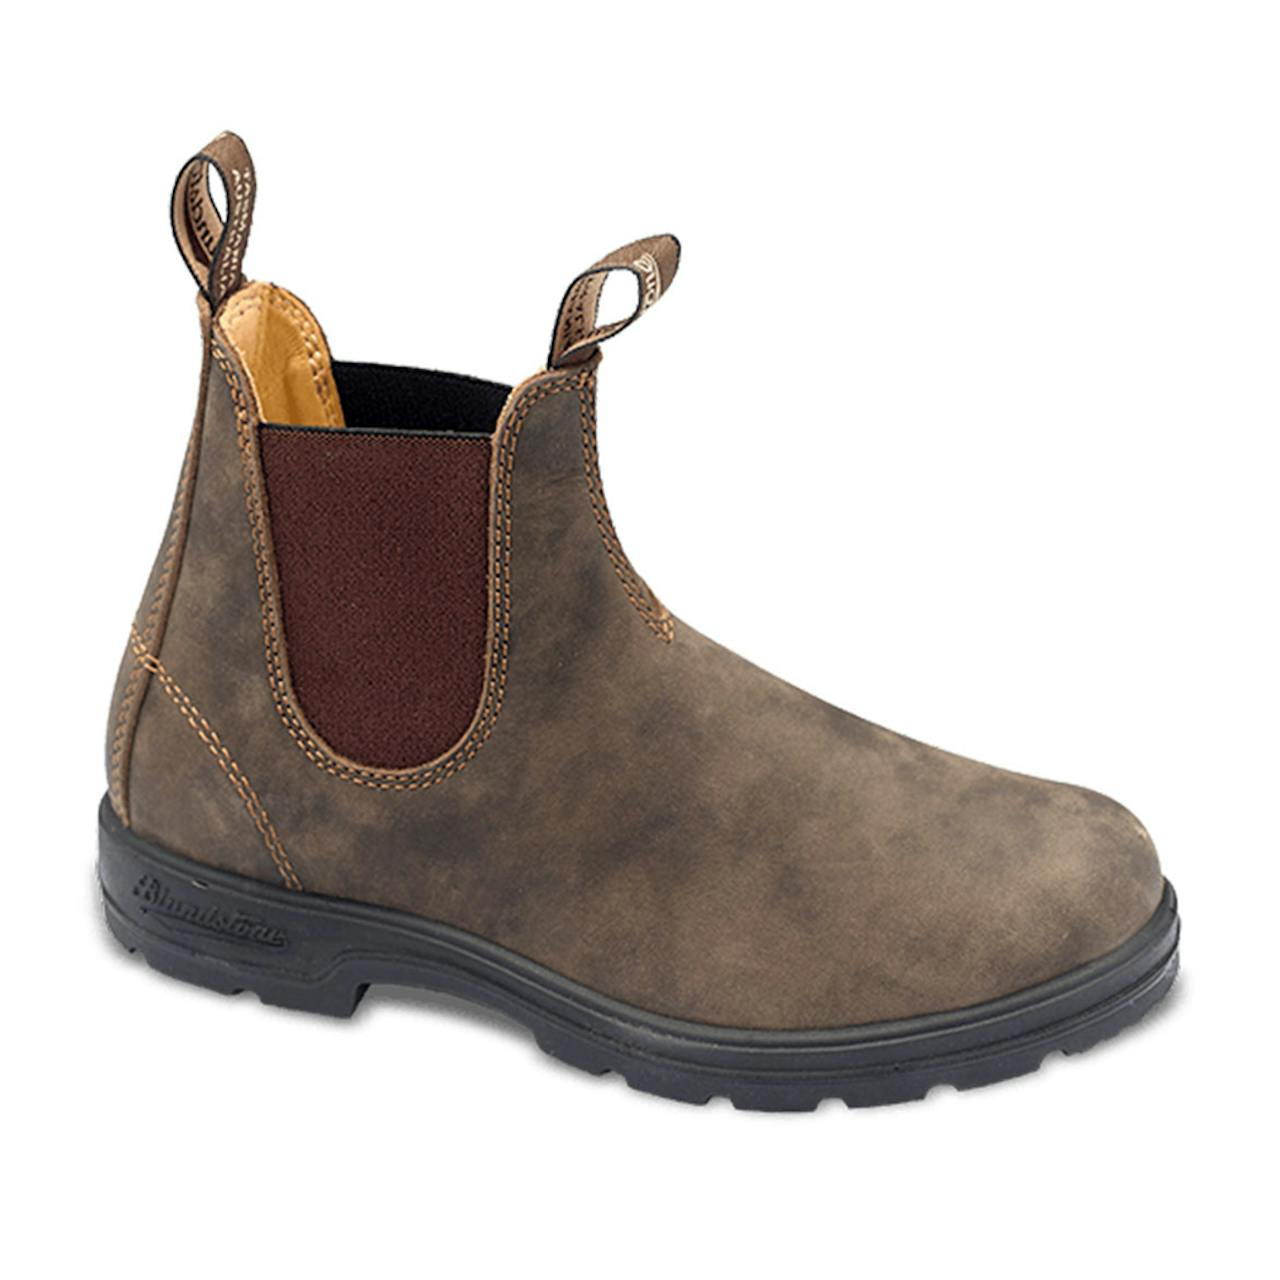 Land luchthaven waterval Blundstone #585 Chelsea Boots - Rustic Brown | Chelsea Boots | Huckberry